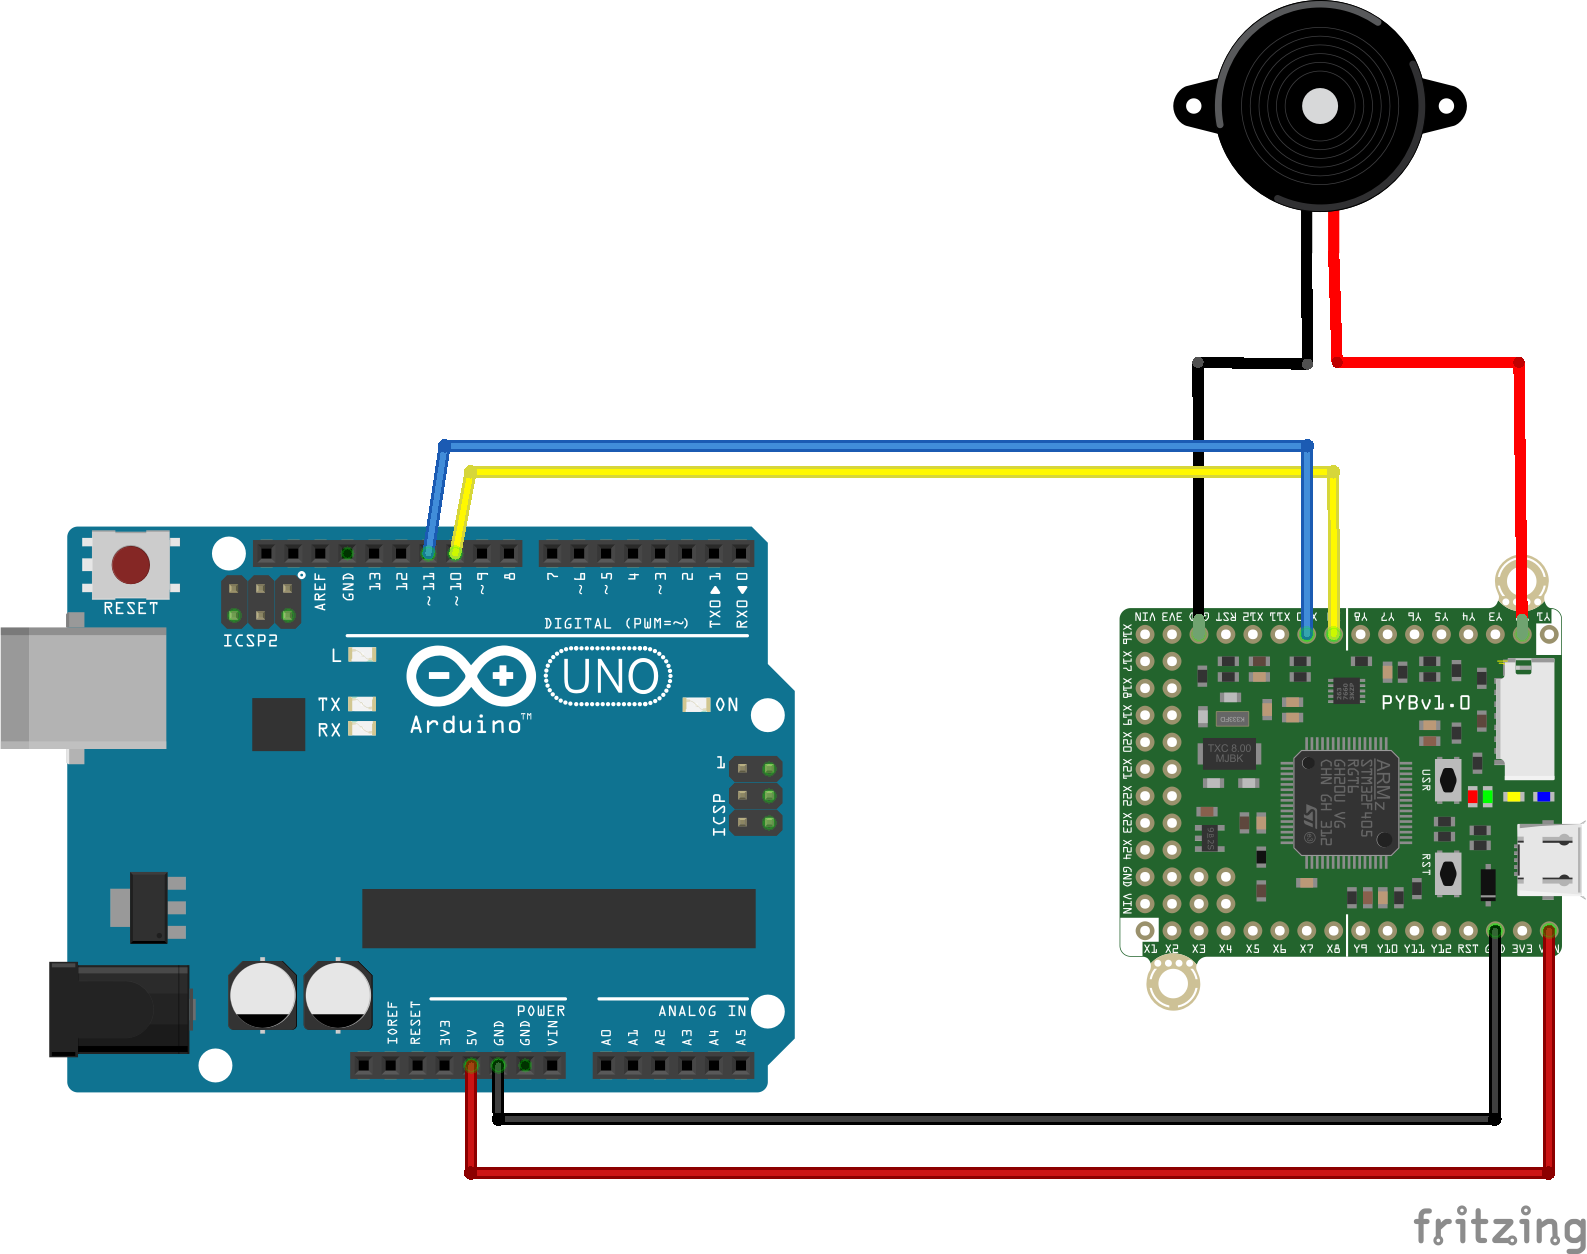 Arduino Uno is connected to the Feather 32u4, which receives signals from the distance sensor.